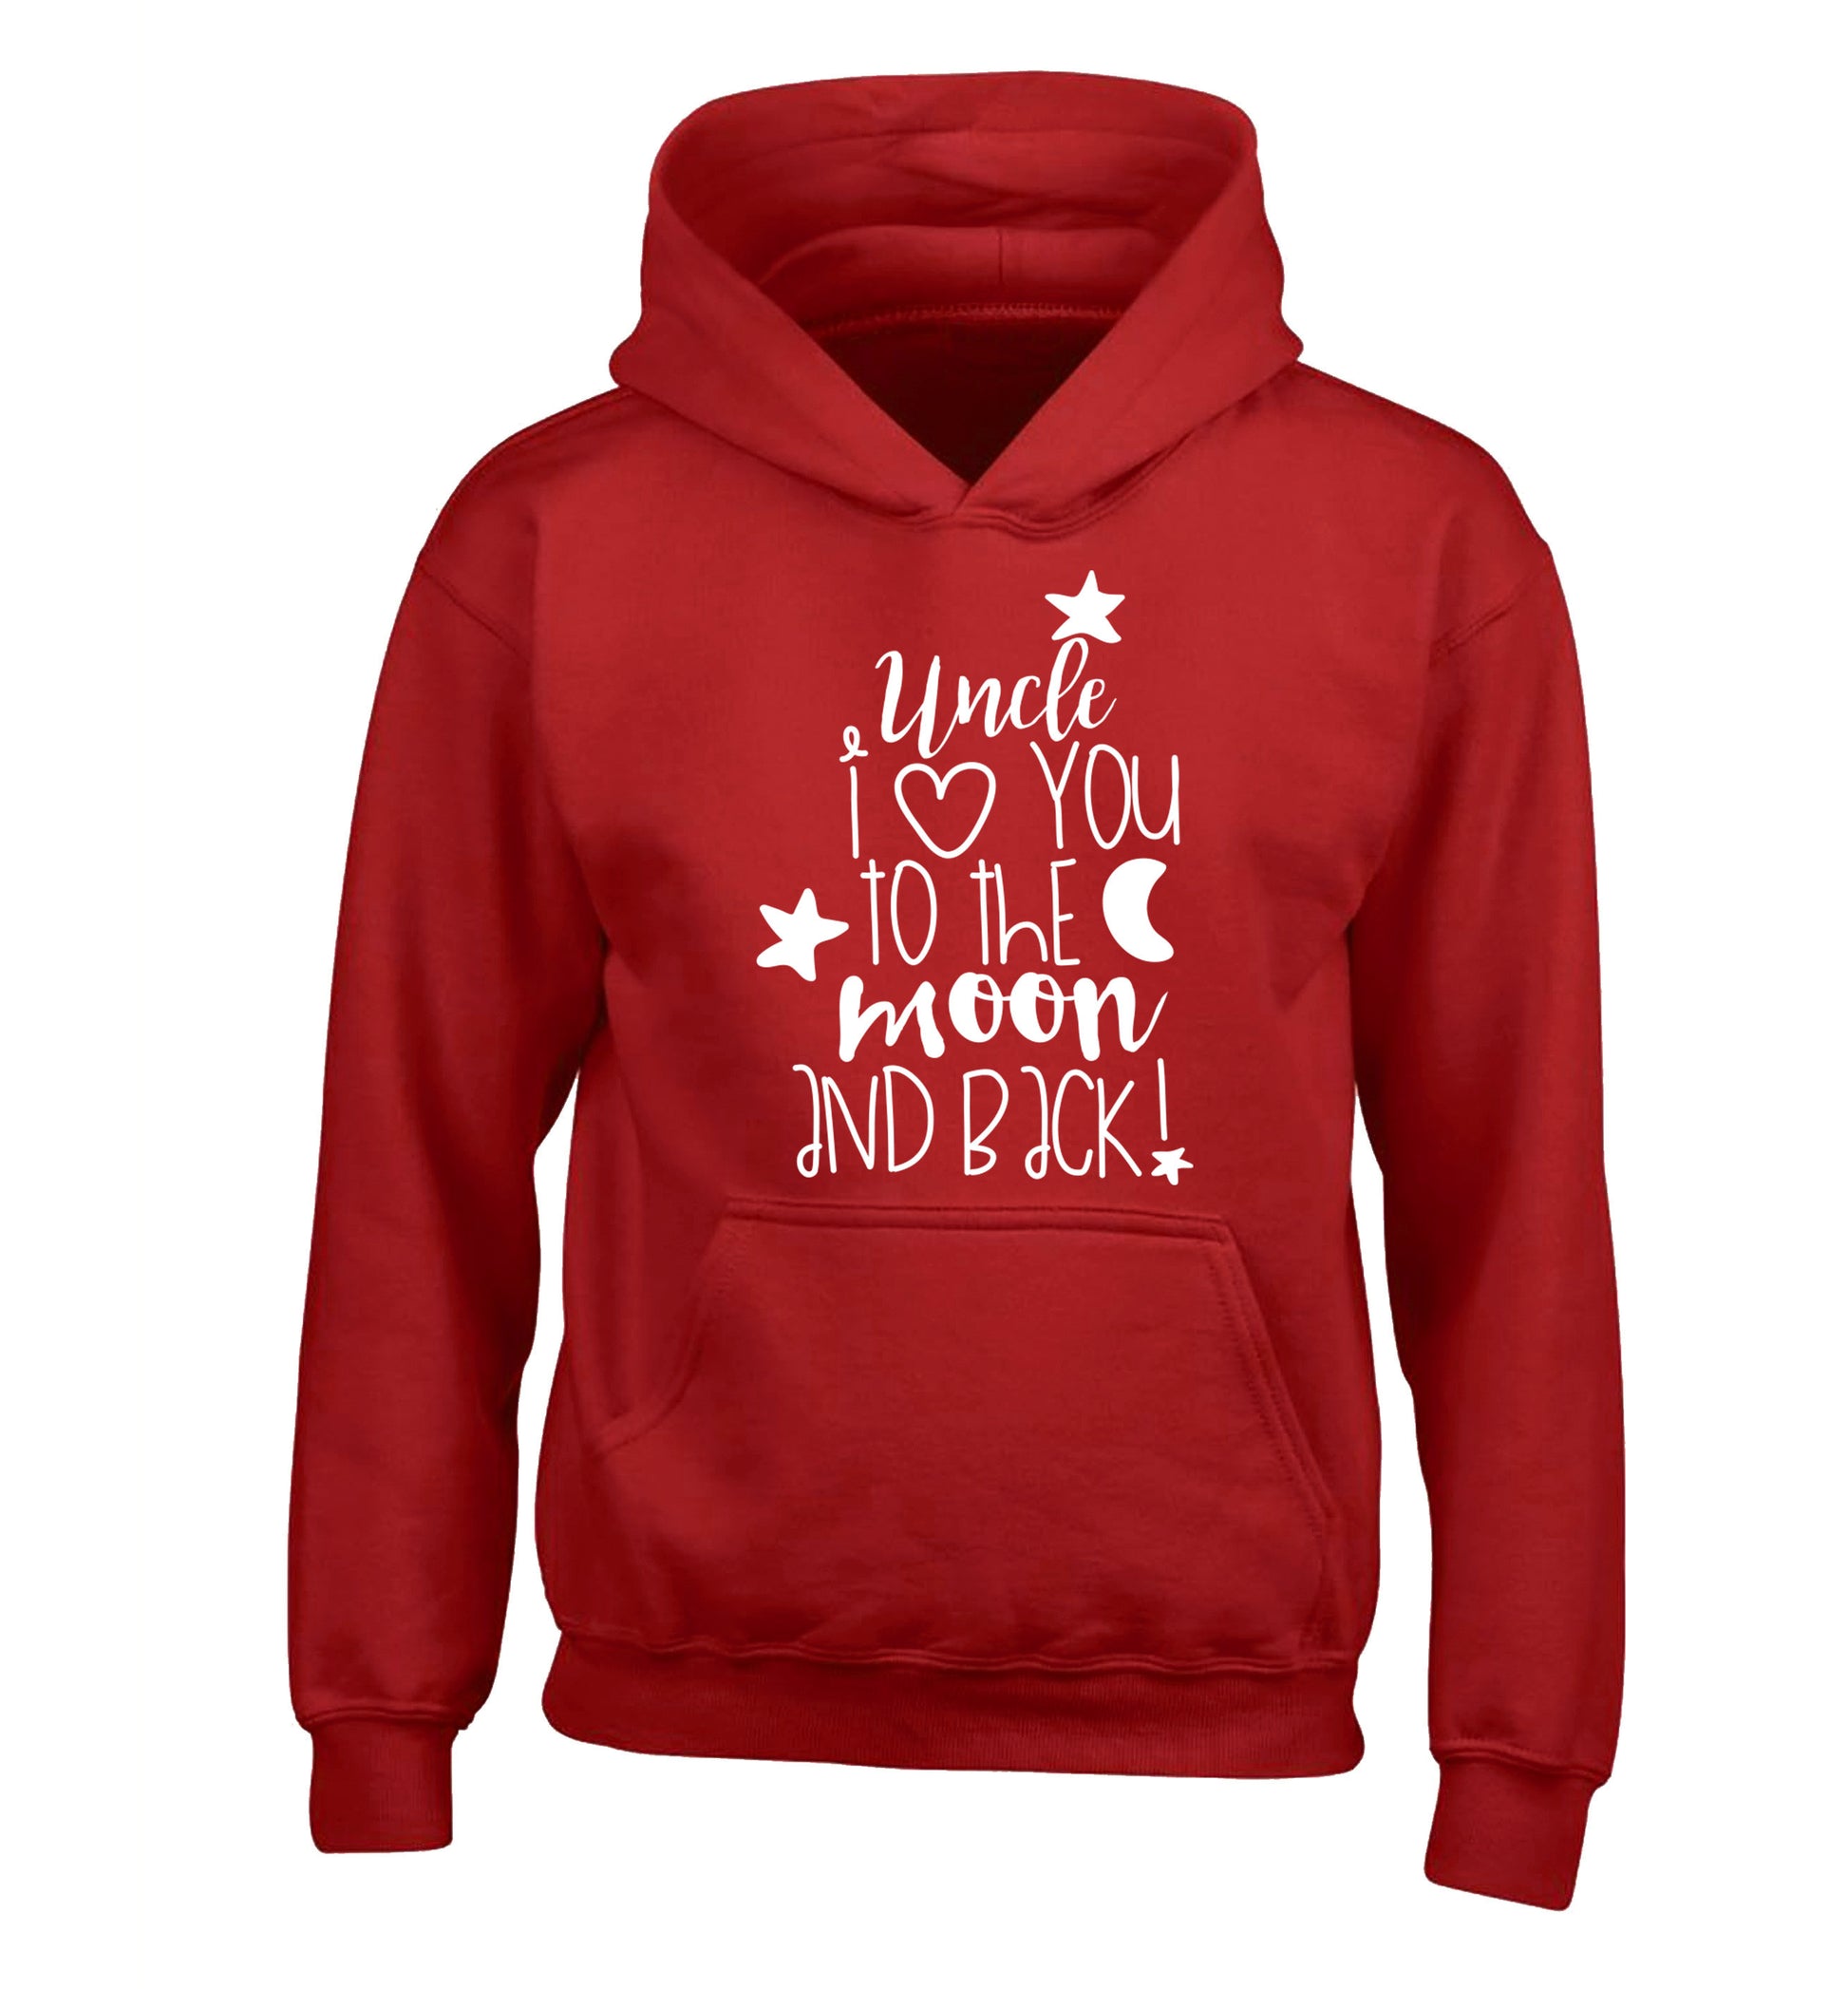 Uncle I love you to the moon and back children's red hoodie 12-14 Years